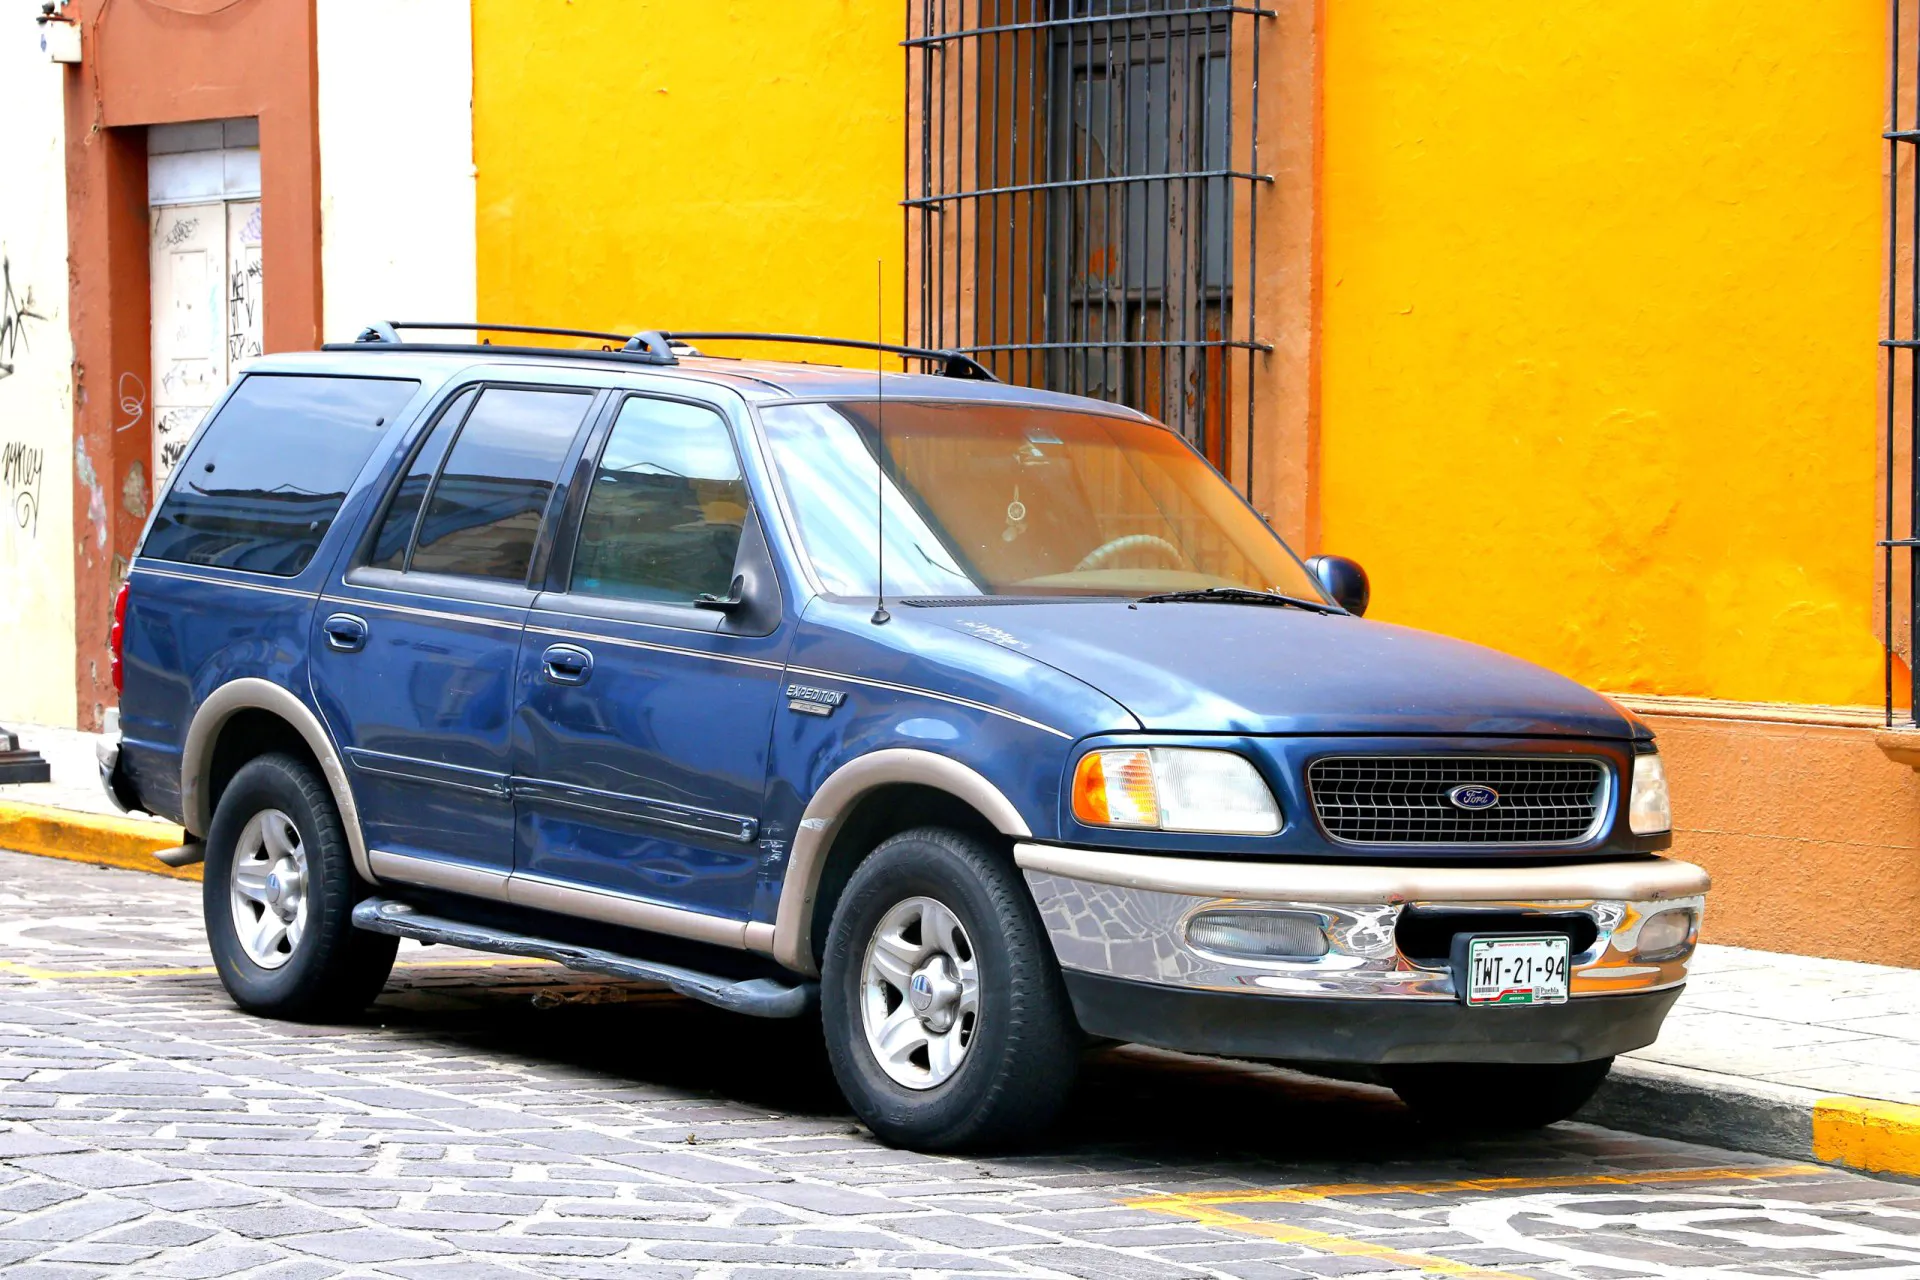 1998 Ford Expedition in the city street.